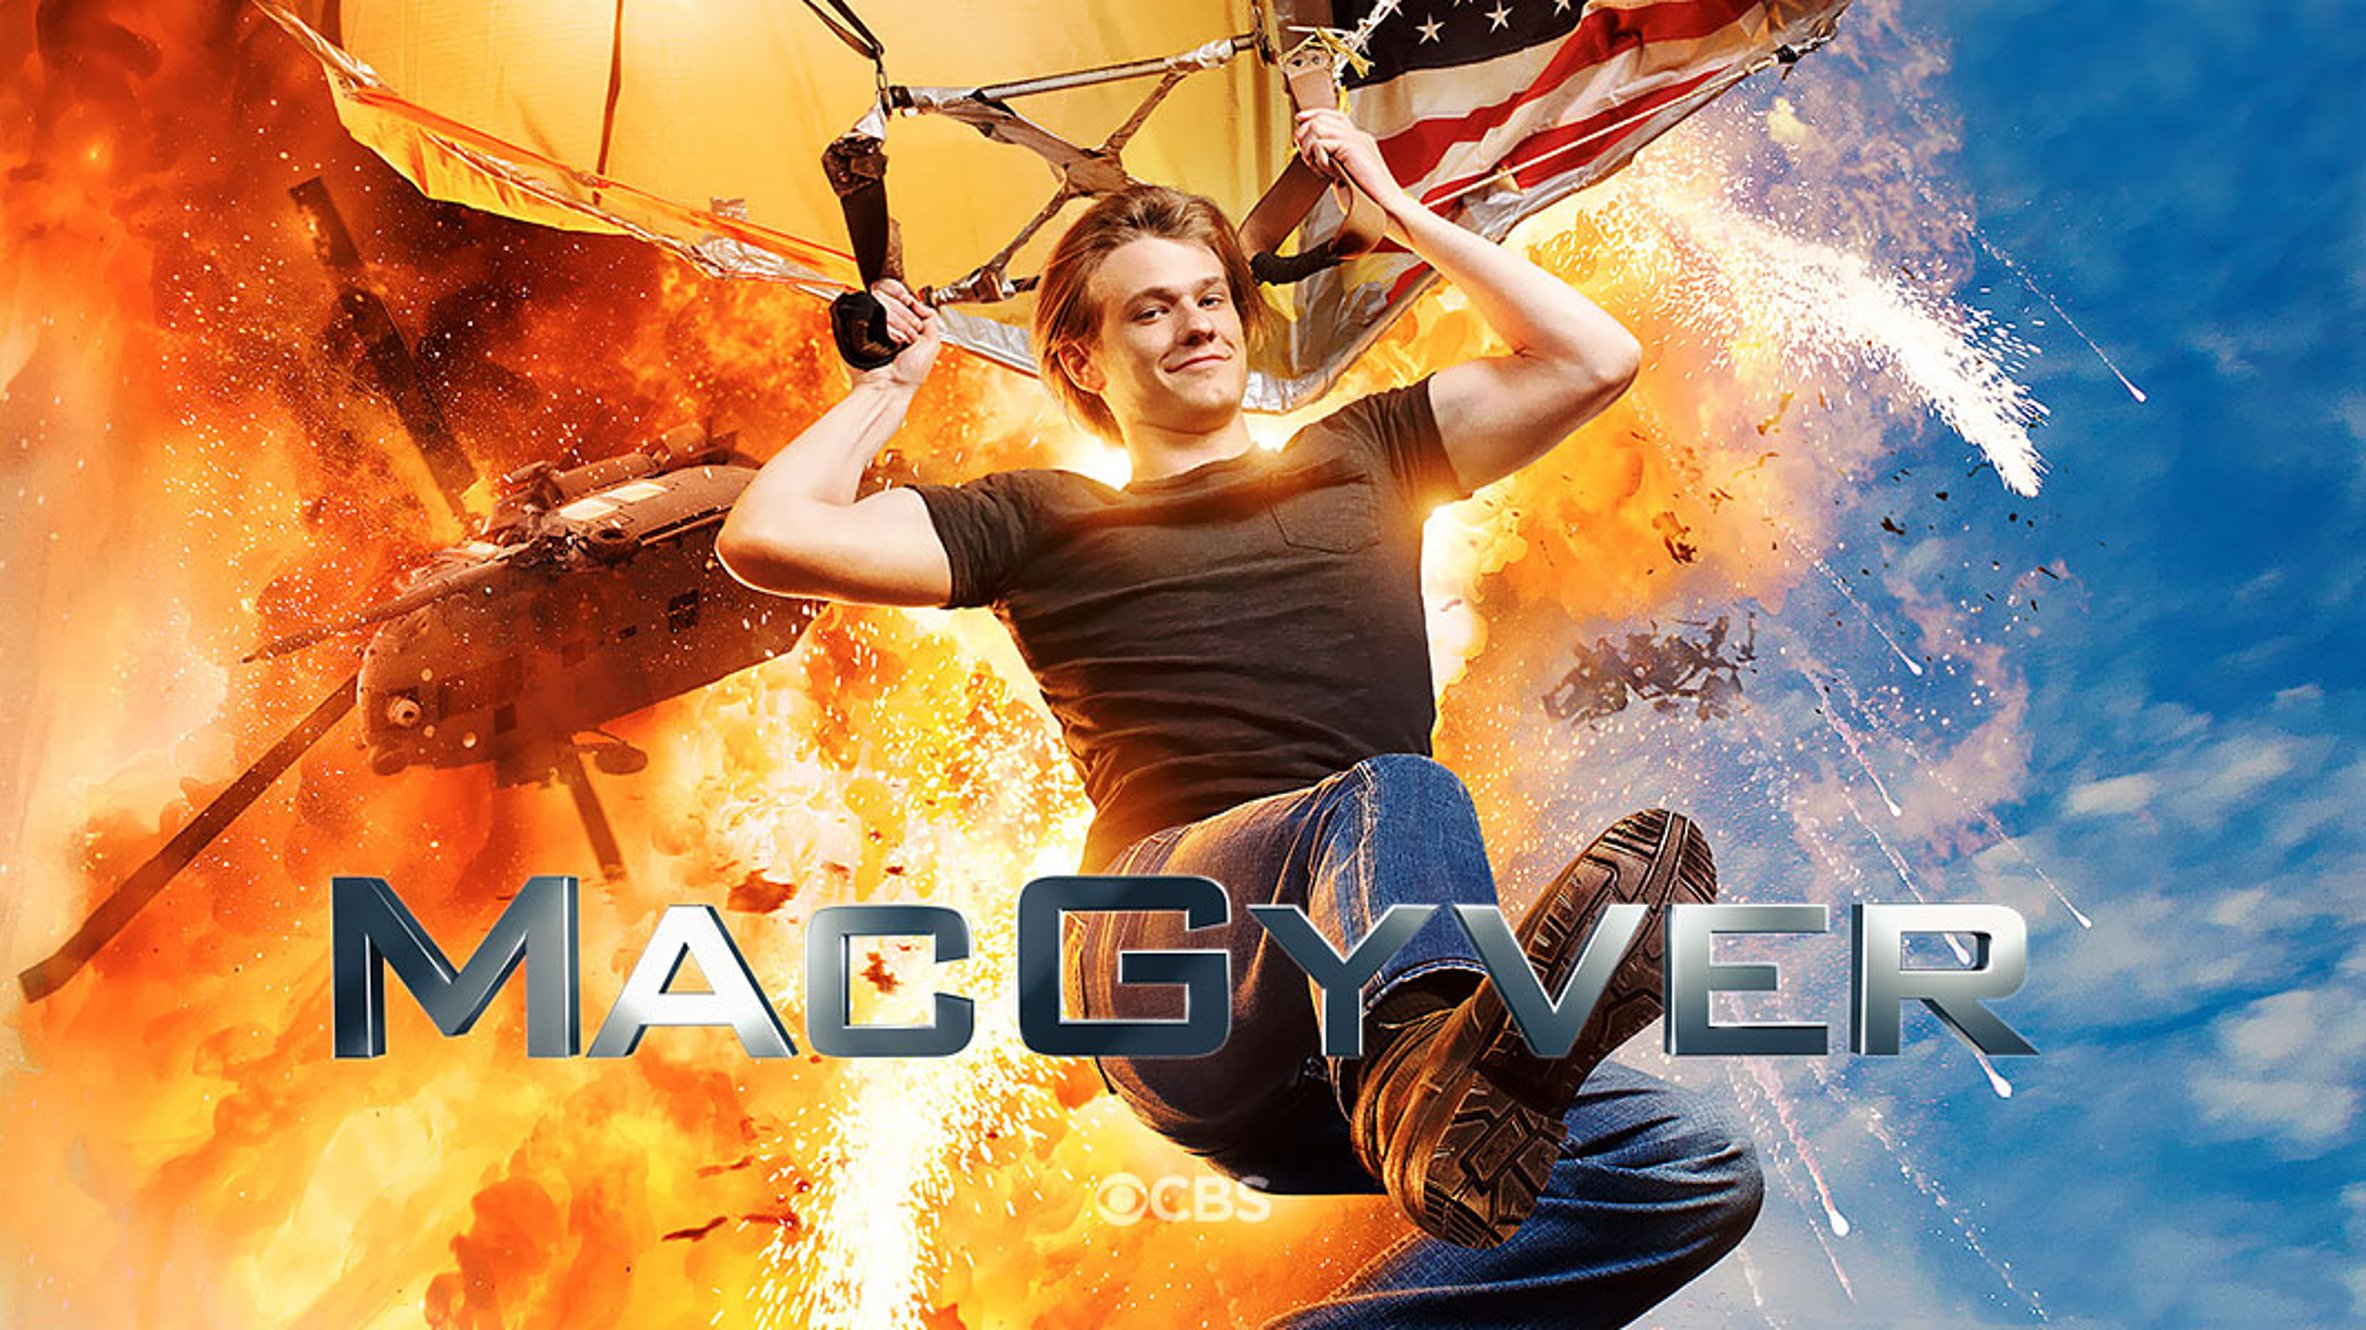 Casting Bad Guys for the CBS TV series MacGyver